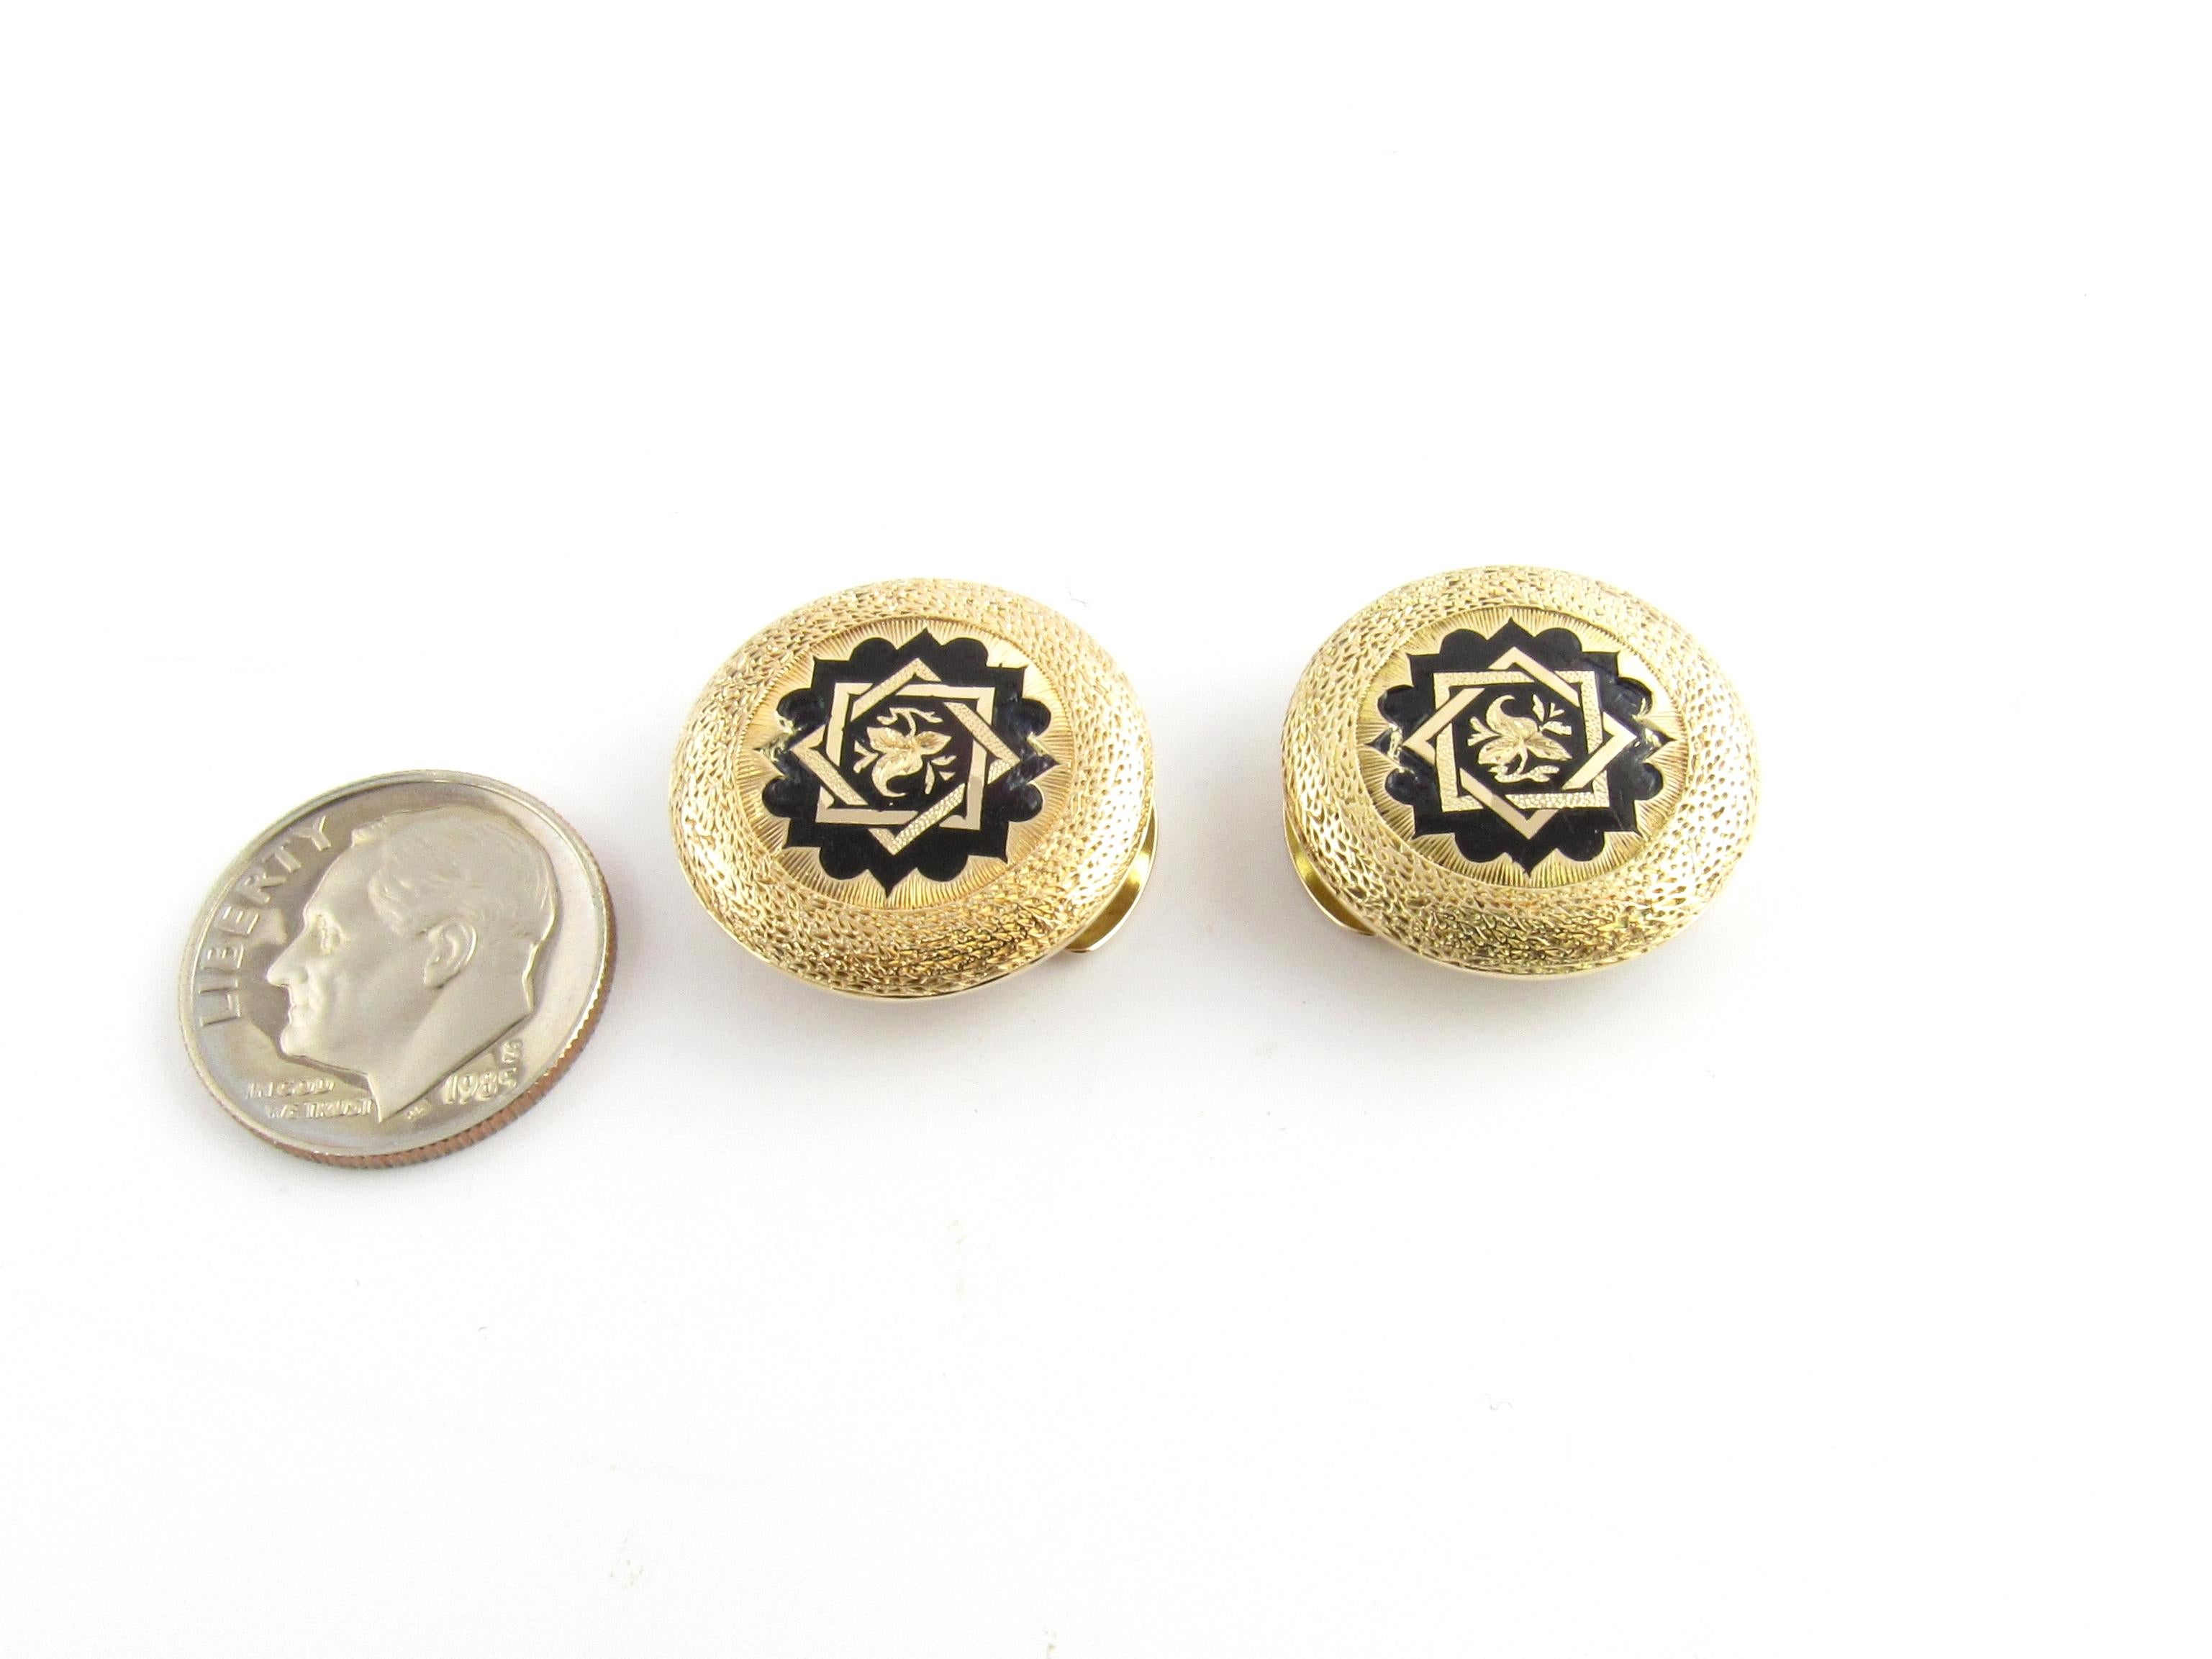 14 Karat Yellow Gold and Enamel Button Covers 1